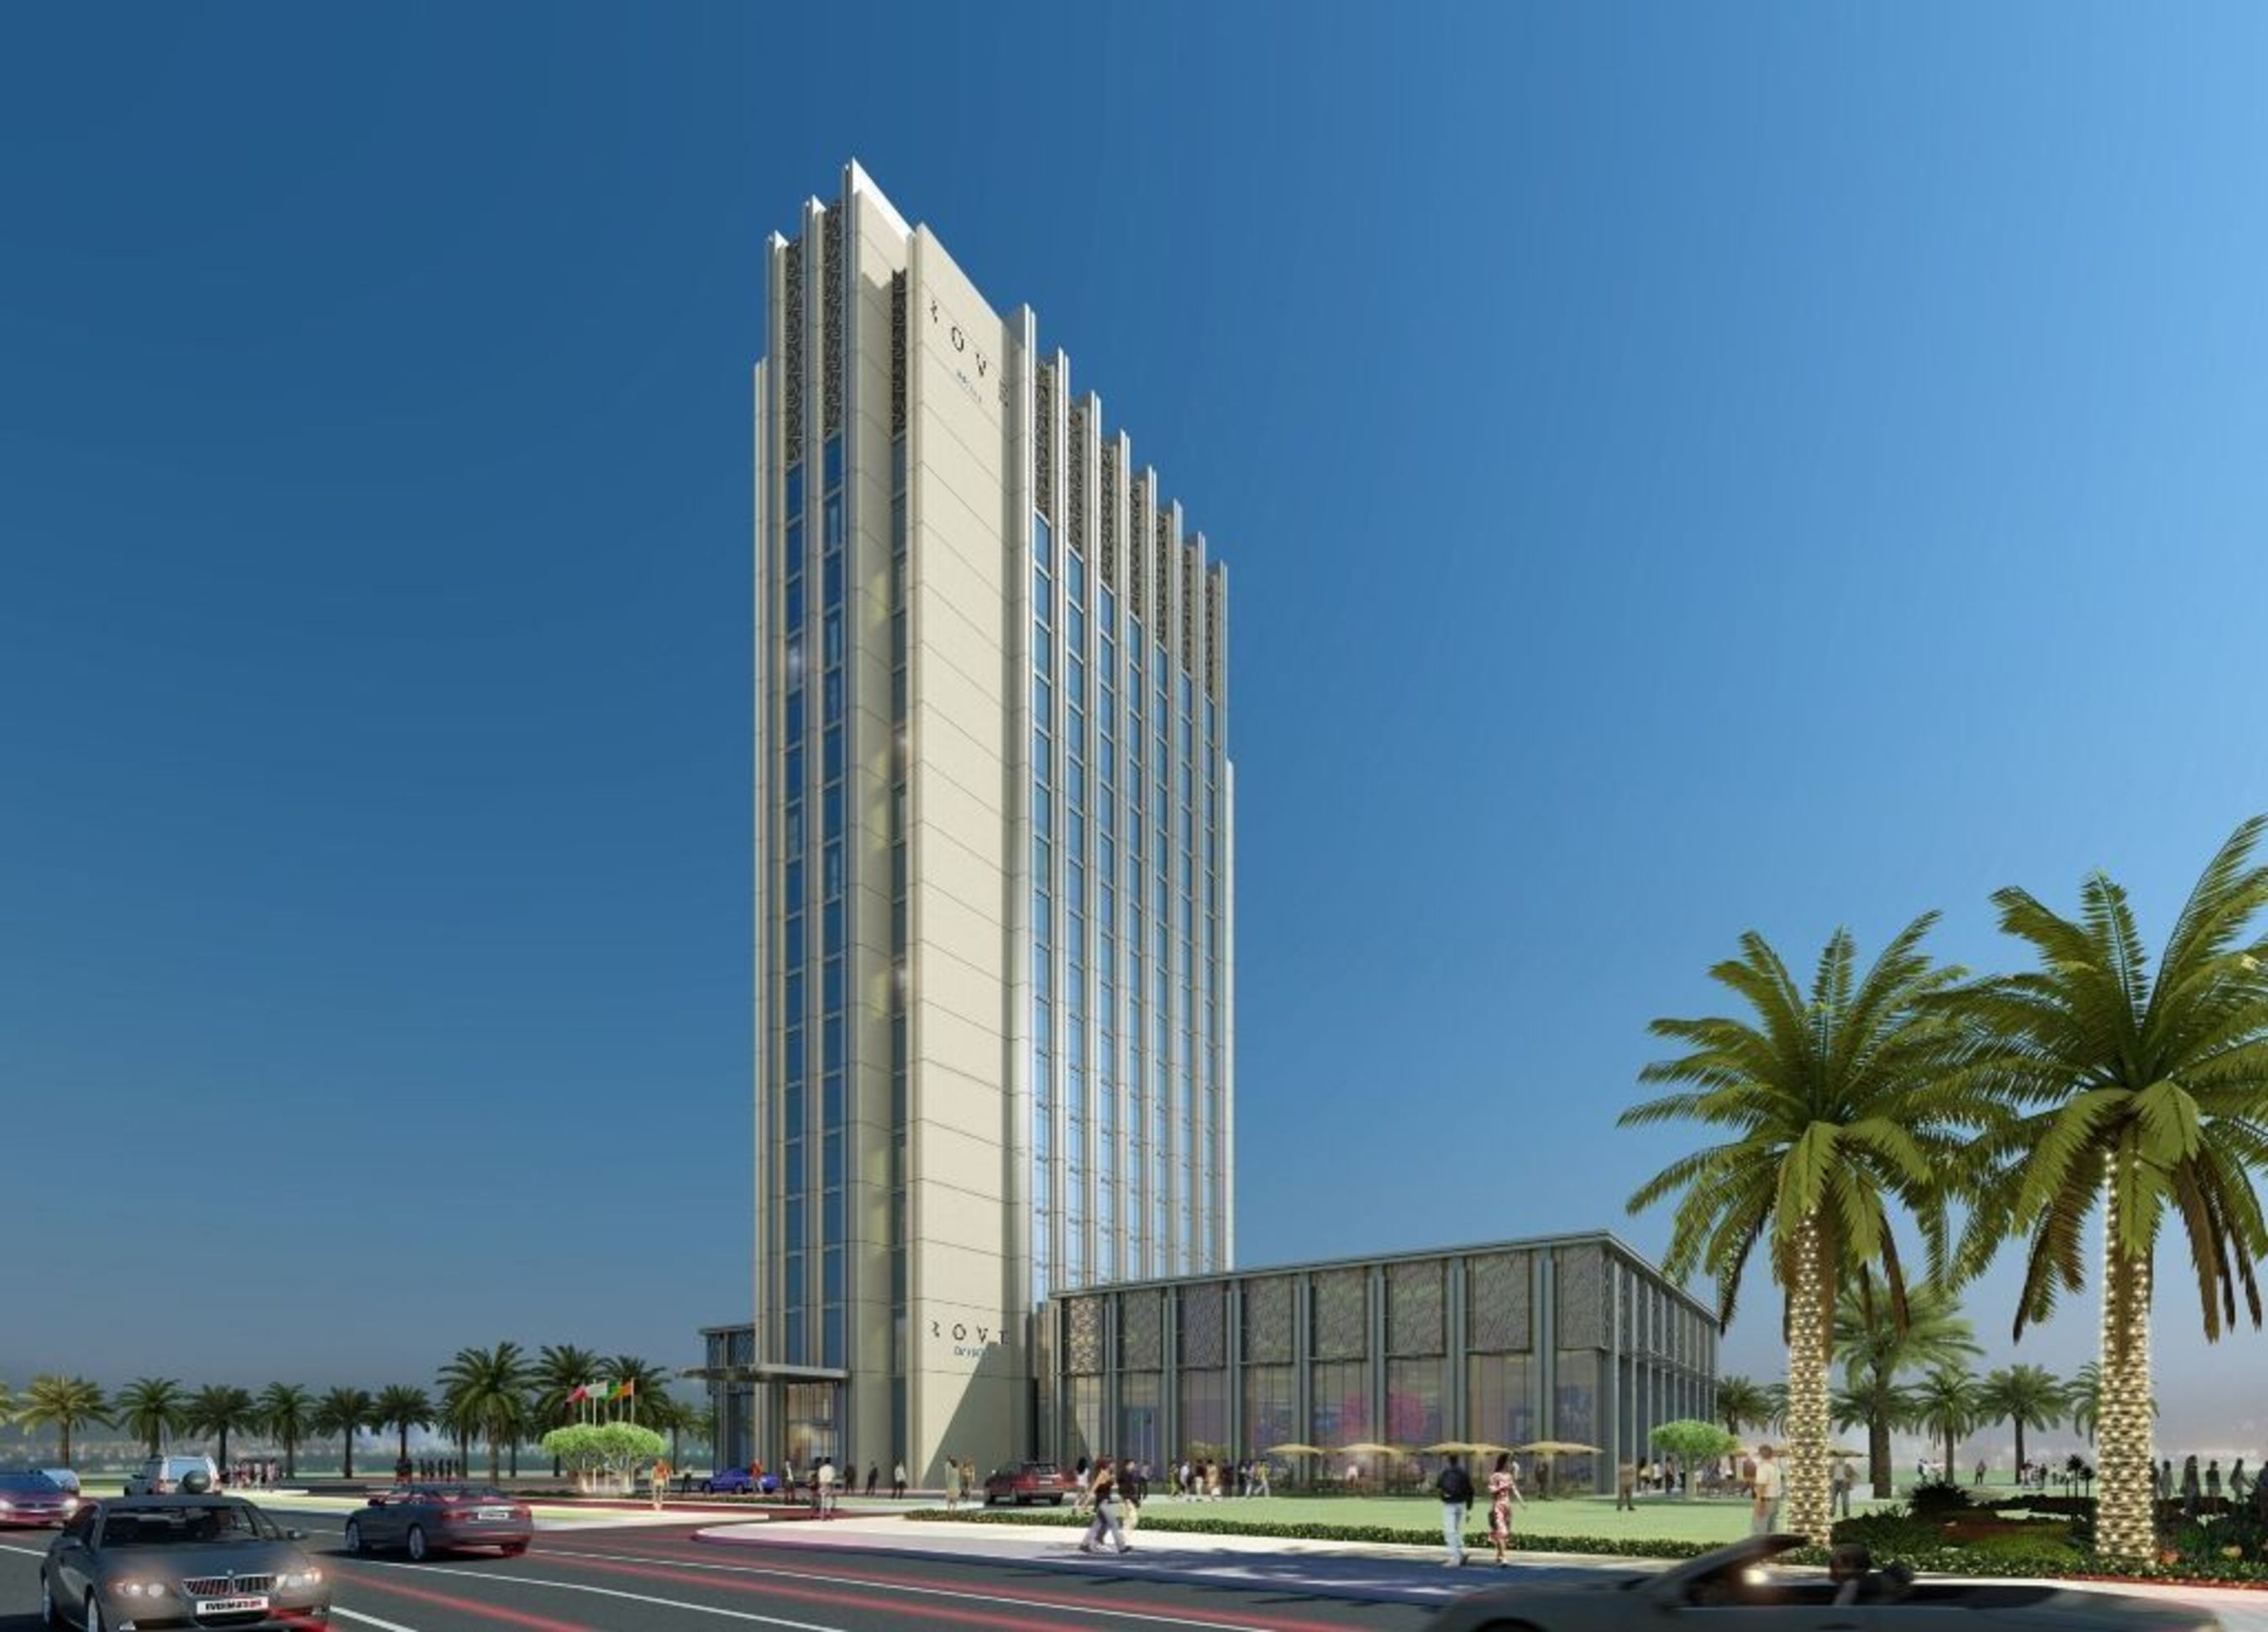 Artist rendering of Rove Za'abeel, the first Rove Hotel, developed by Emaar Hospitality Group in Dubai, which is scheduled to open later this year. Modern, cosmopolitan, smart and cultural, Rove Hotels embody the essence of Dubai's identity. A contemporary new mid-market lifestyle hotel brand, Rove Hotels will roll out 10 properties across central locations in Dubai and the region by 2020. (PRNewsFoto/Emaar Hospitality Group)